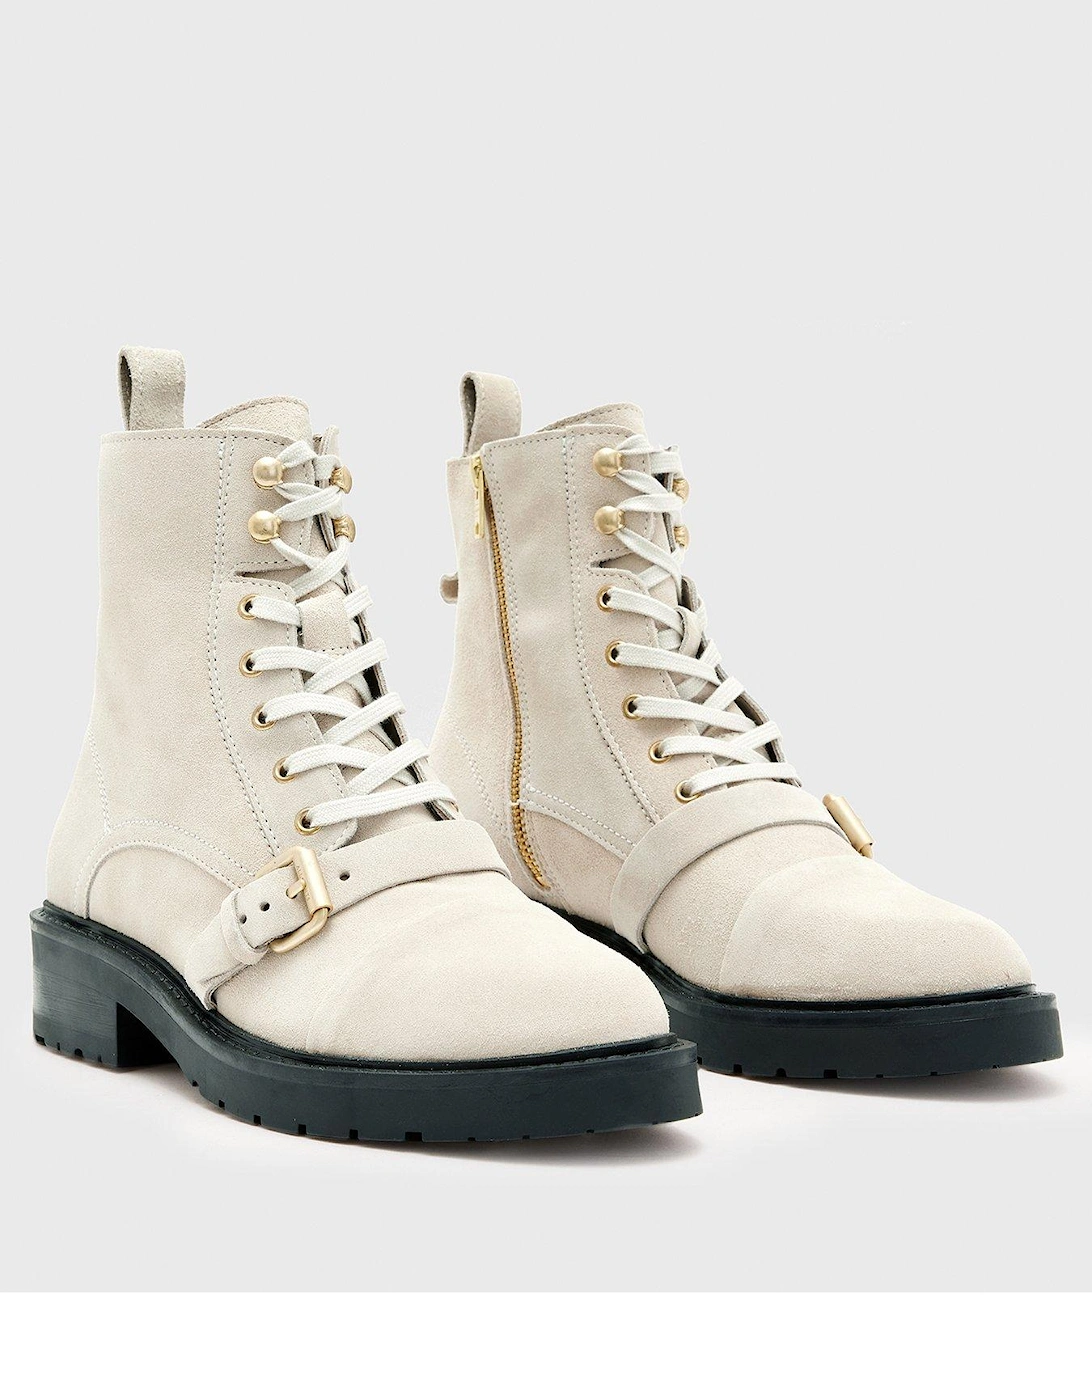 Donita Suede Boots - Stone White